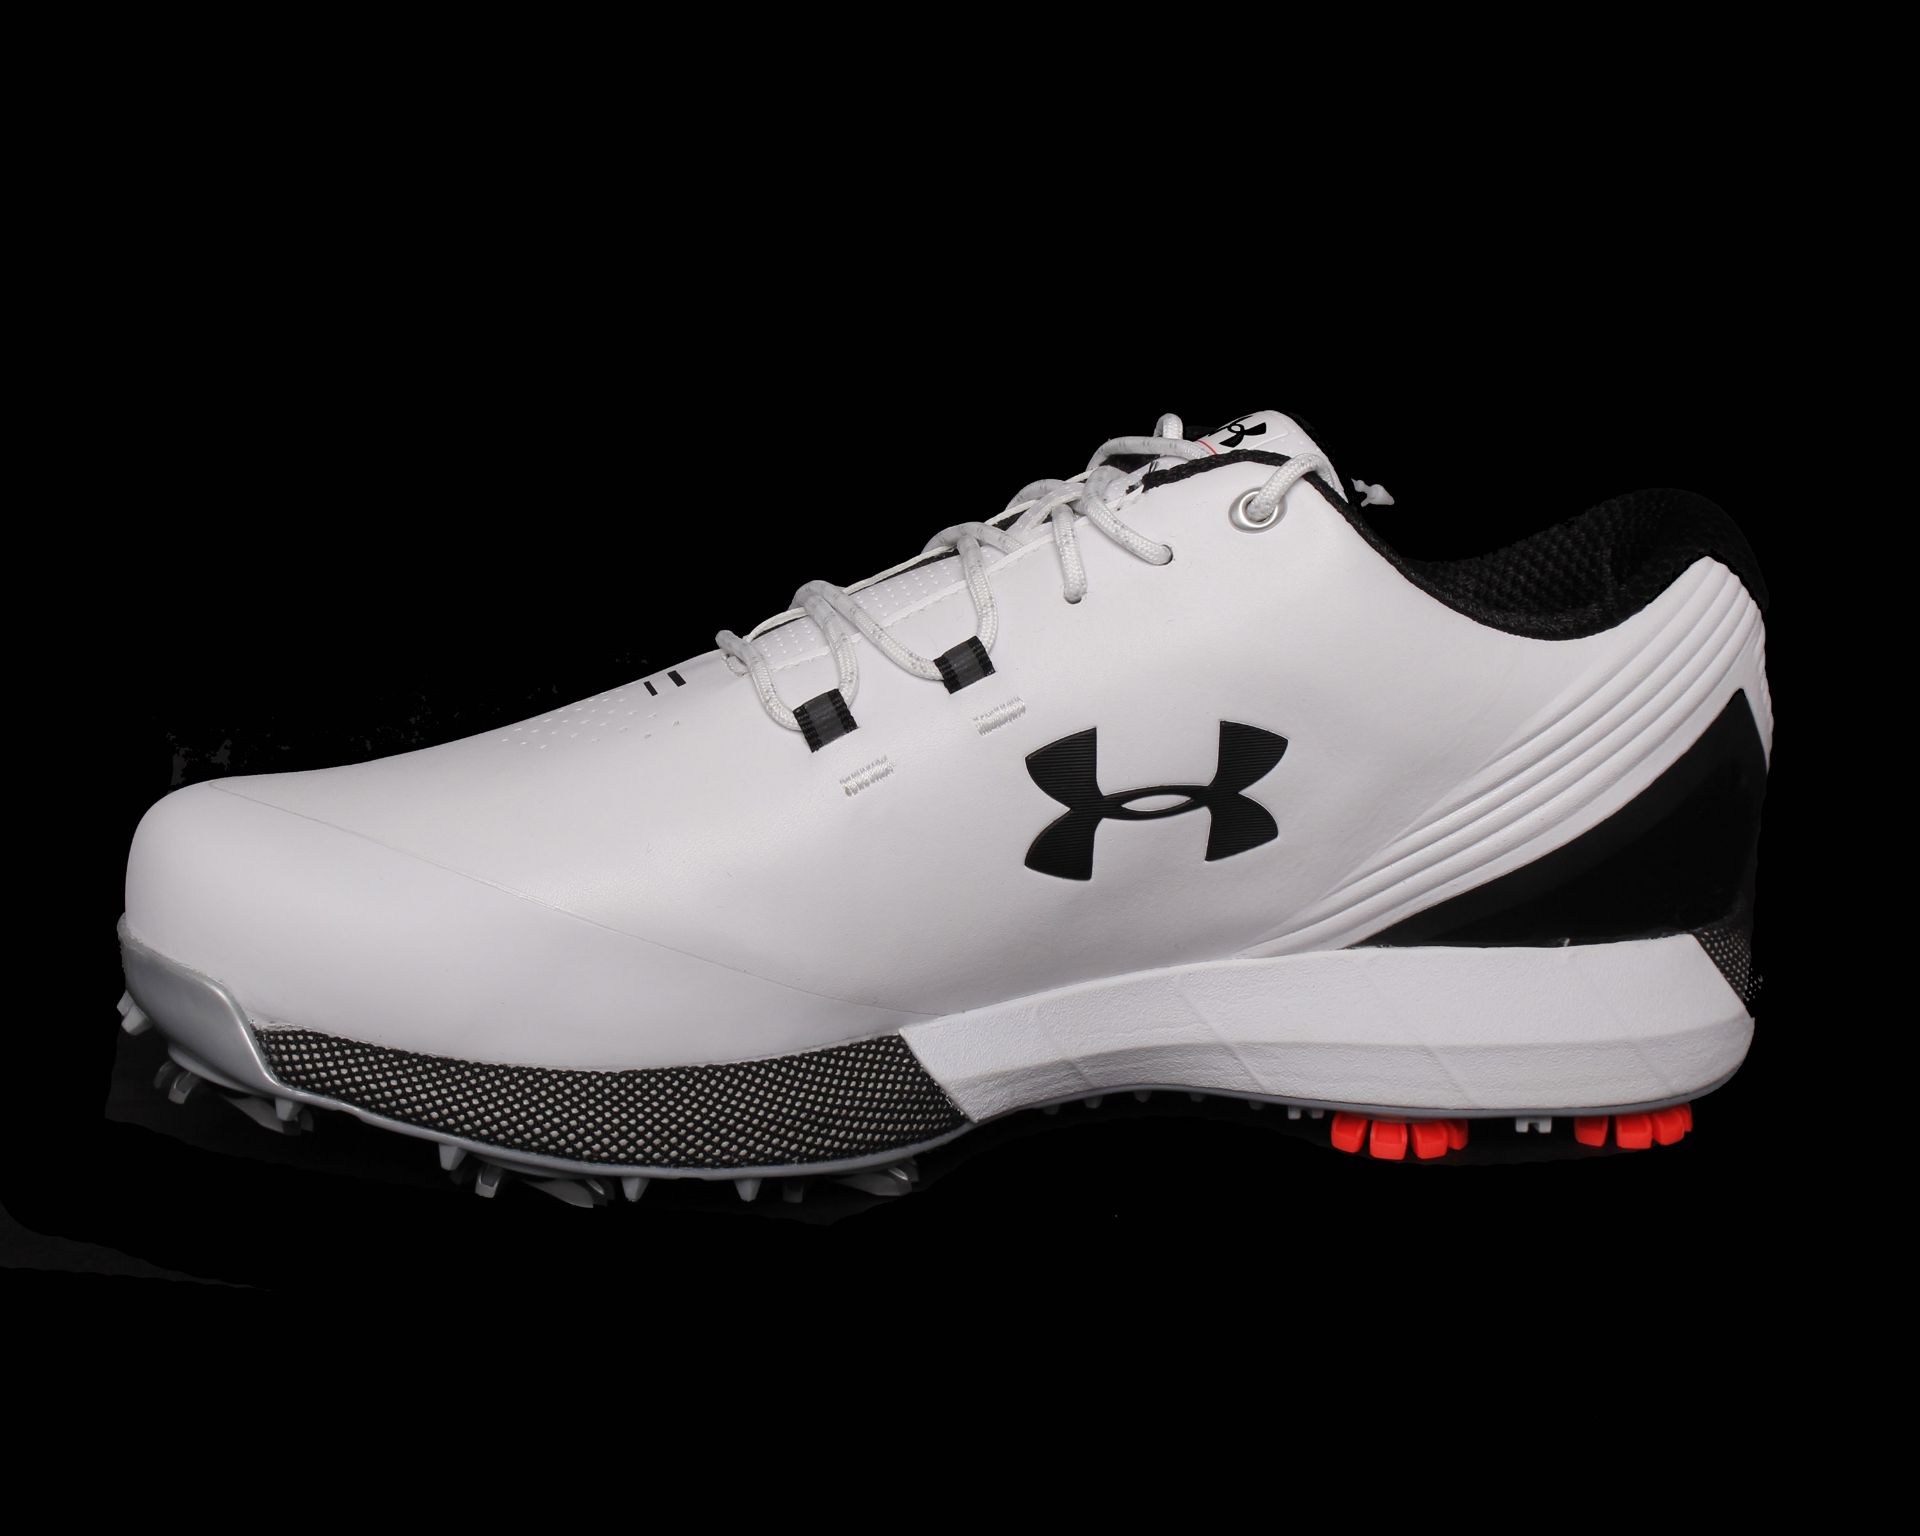 One pair of men's boxed as new Under Armour HOVR Drive GTX E spiked golf shoes in white (UK 9.5).